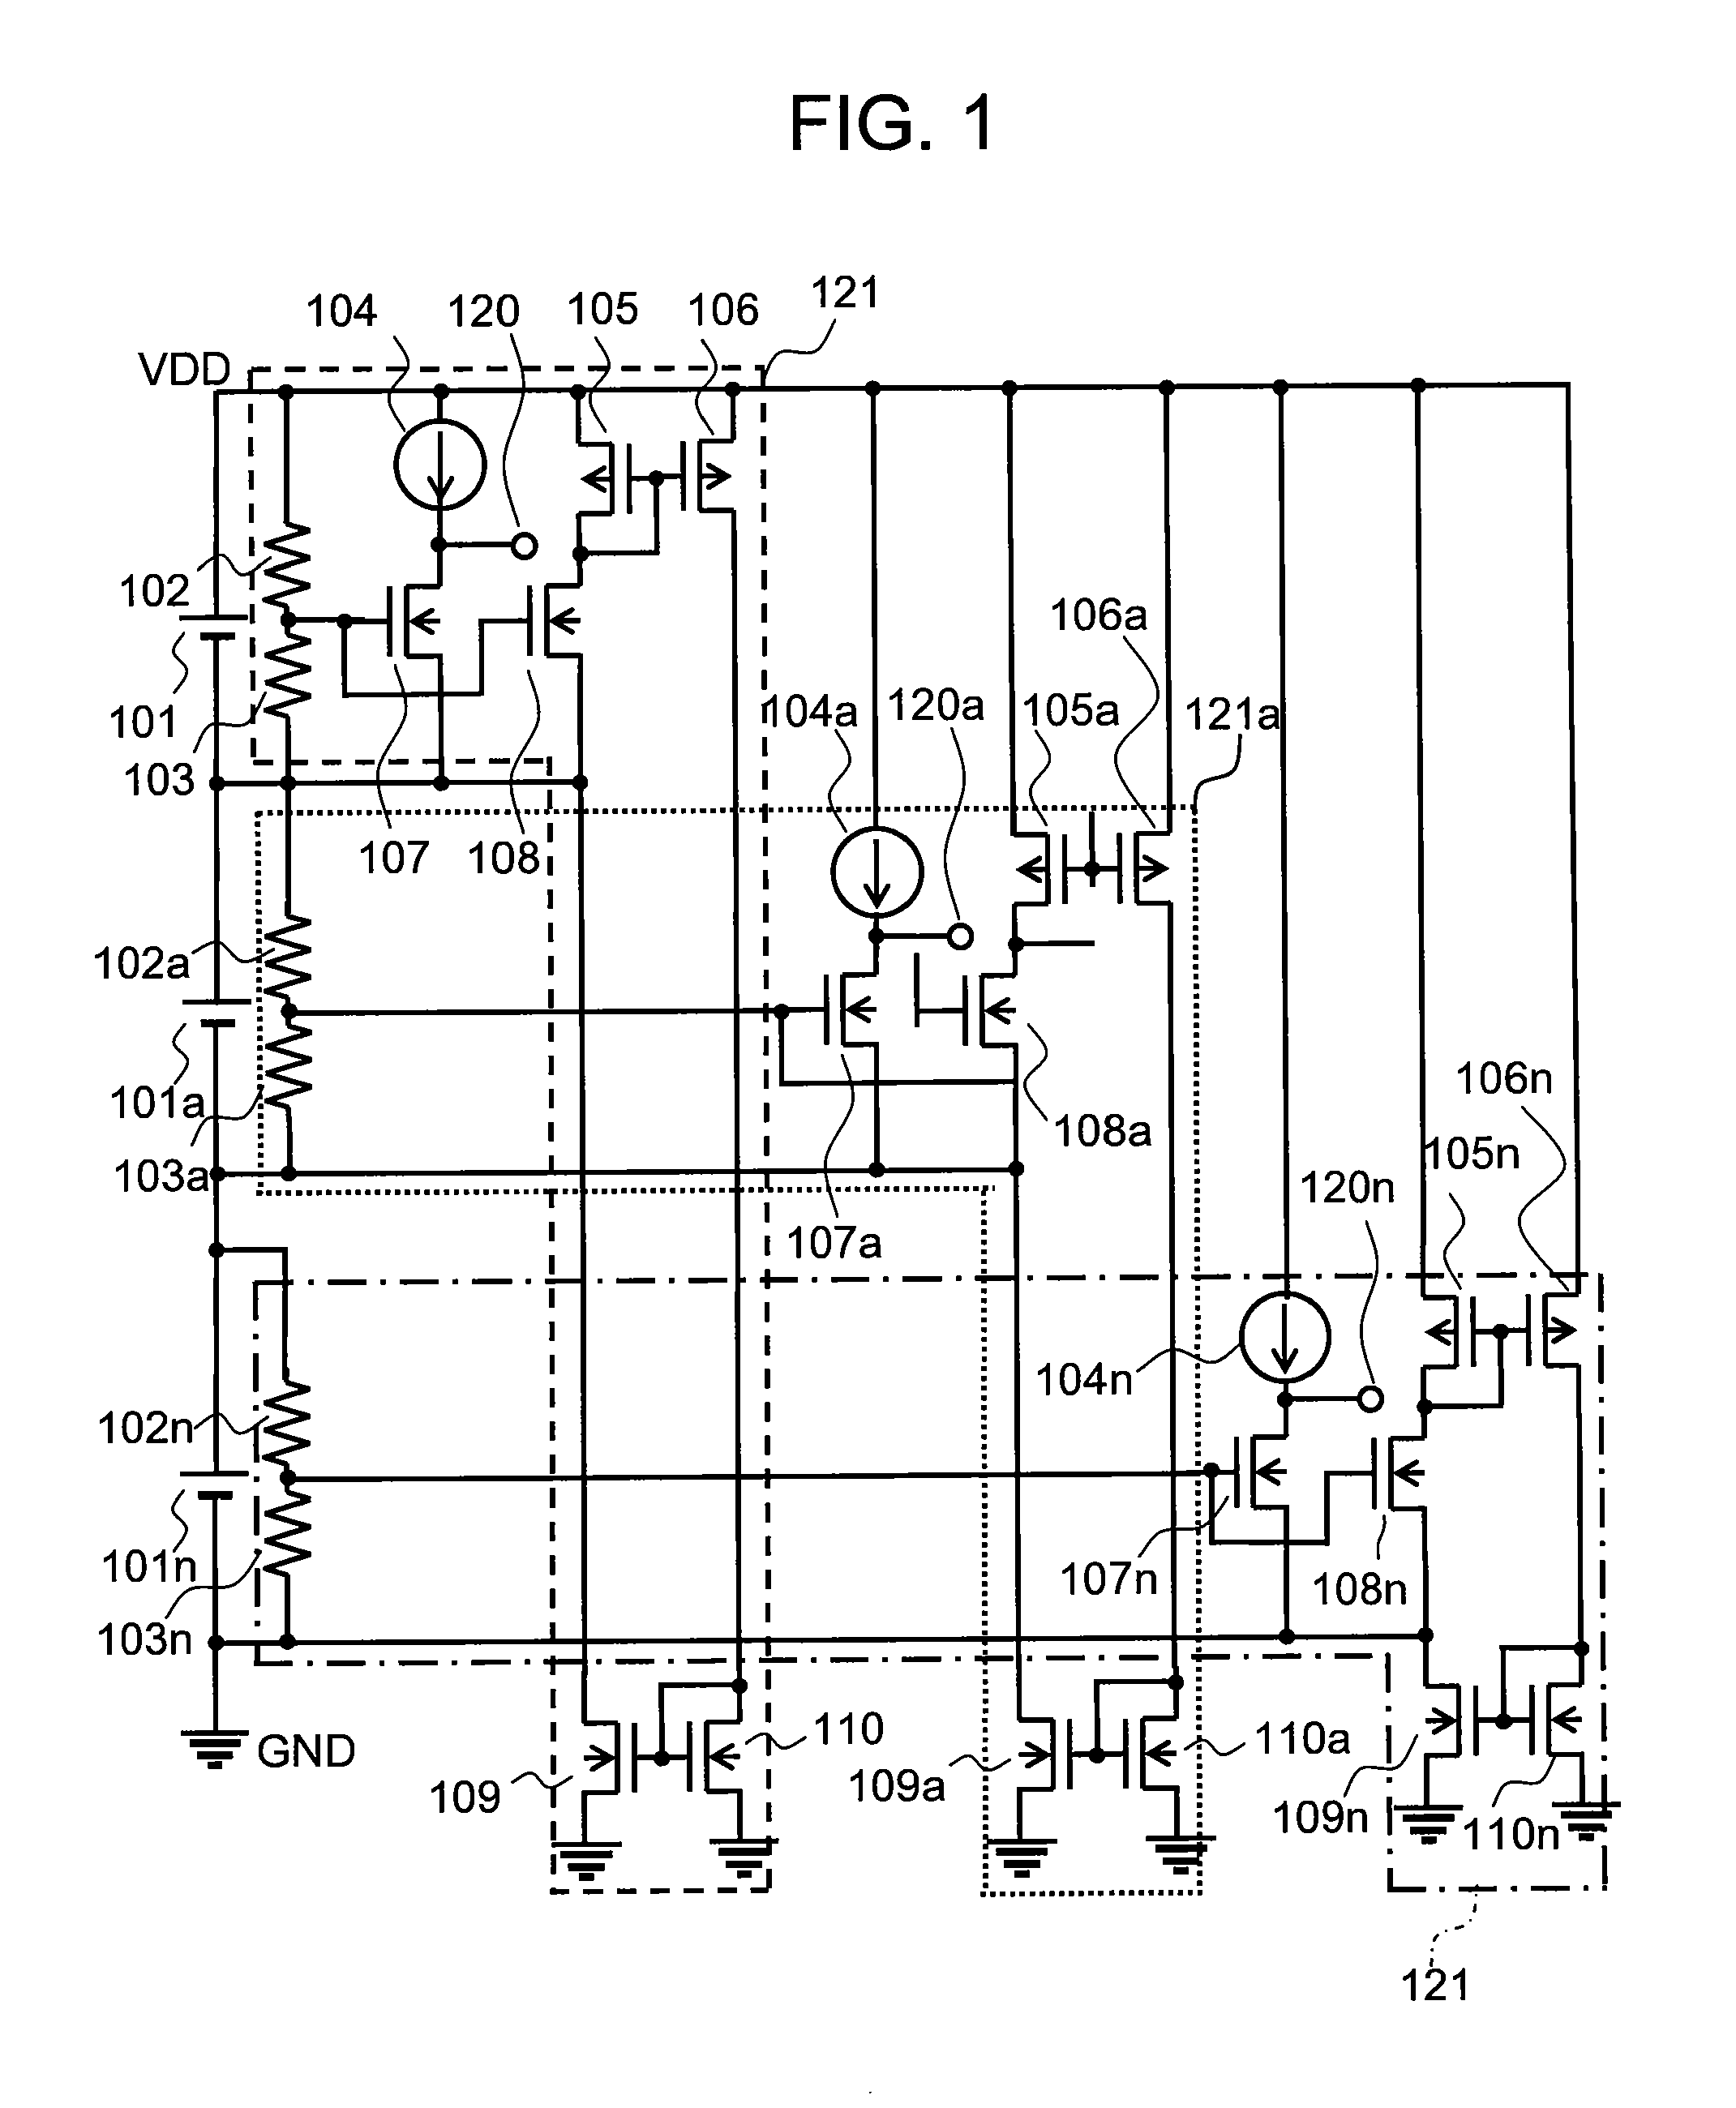 Battery state monitoring circuit and battery device